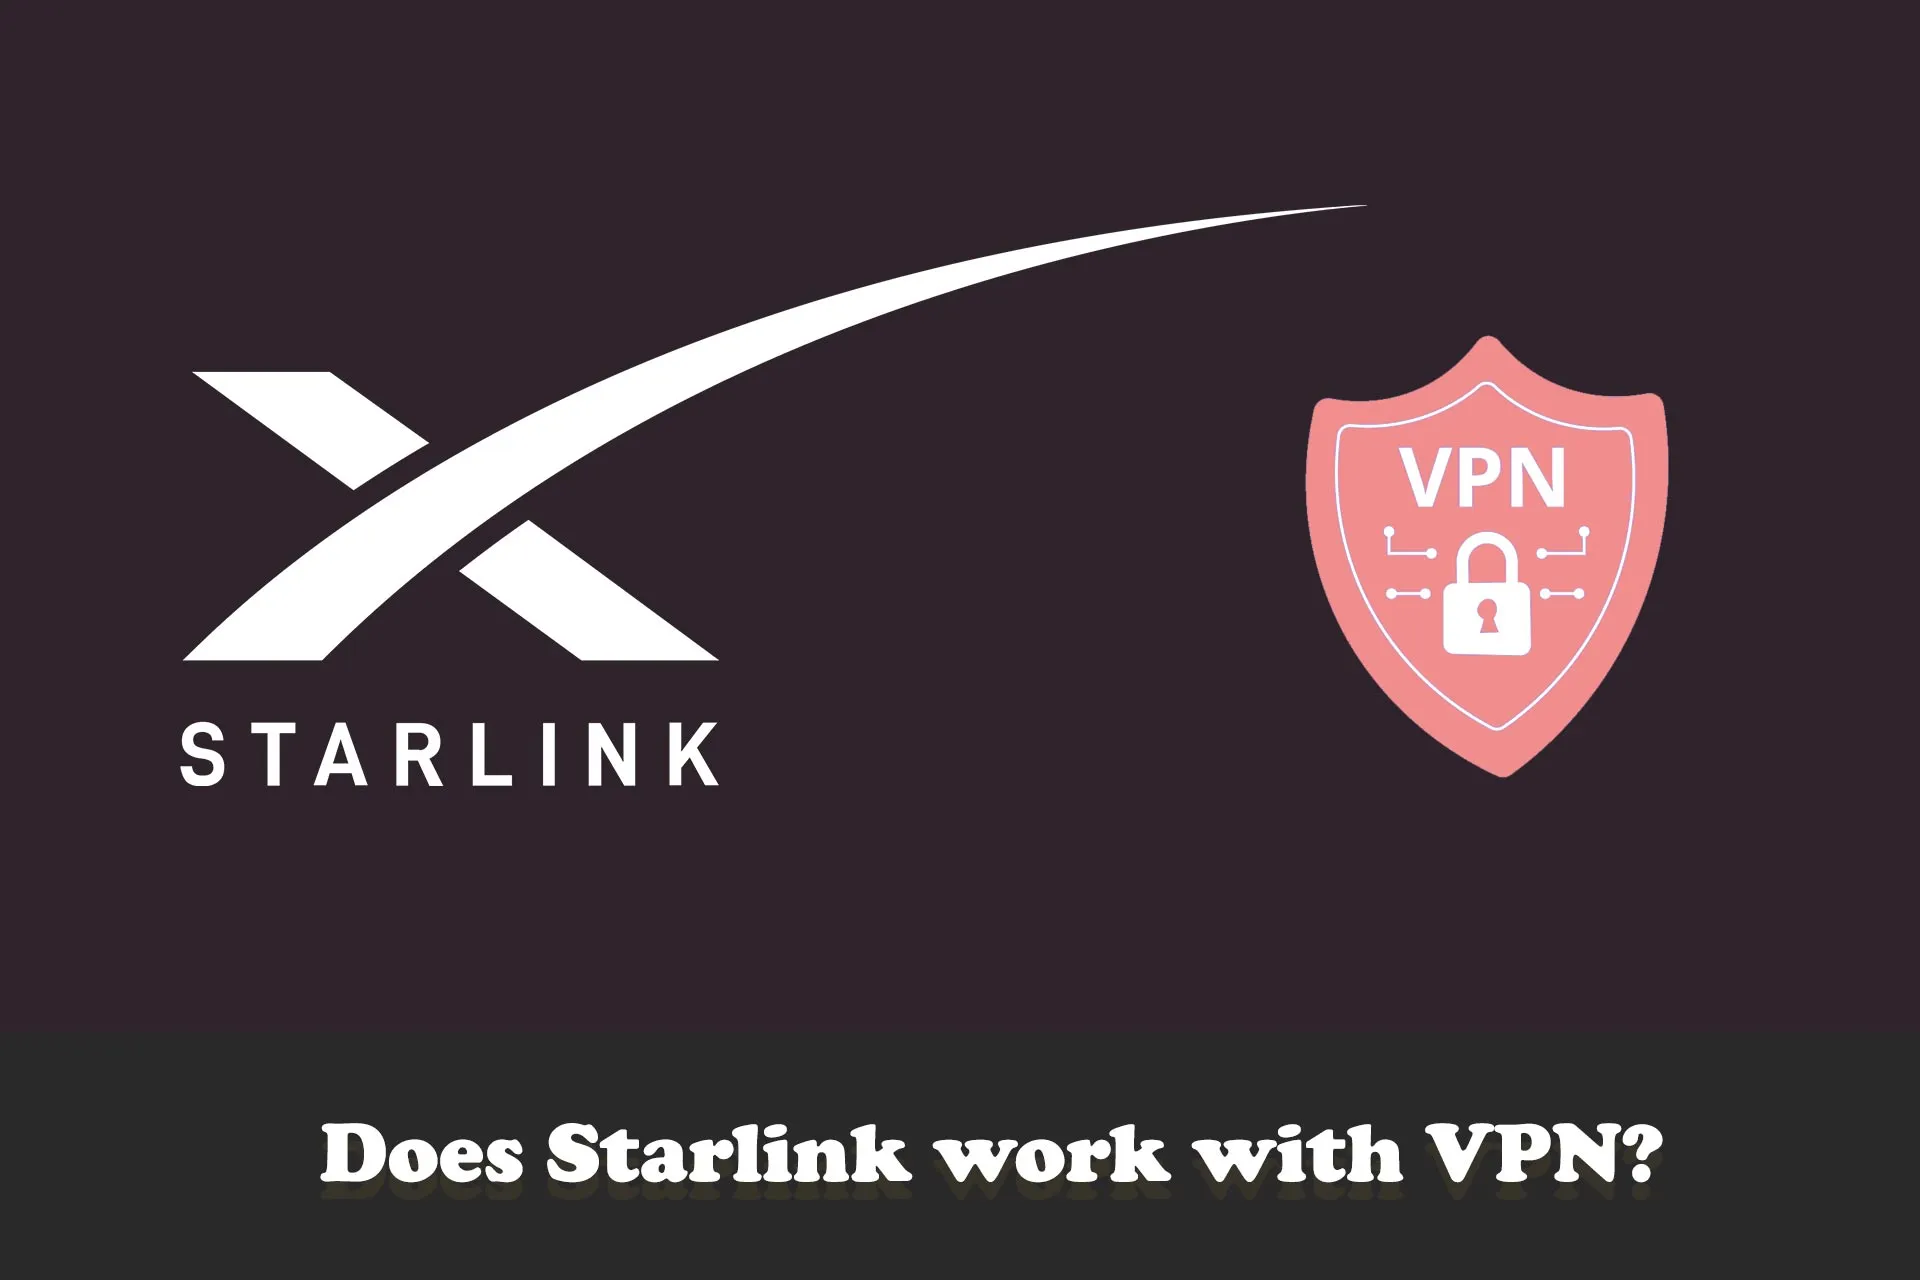 Does Starlink work with VPN